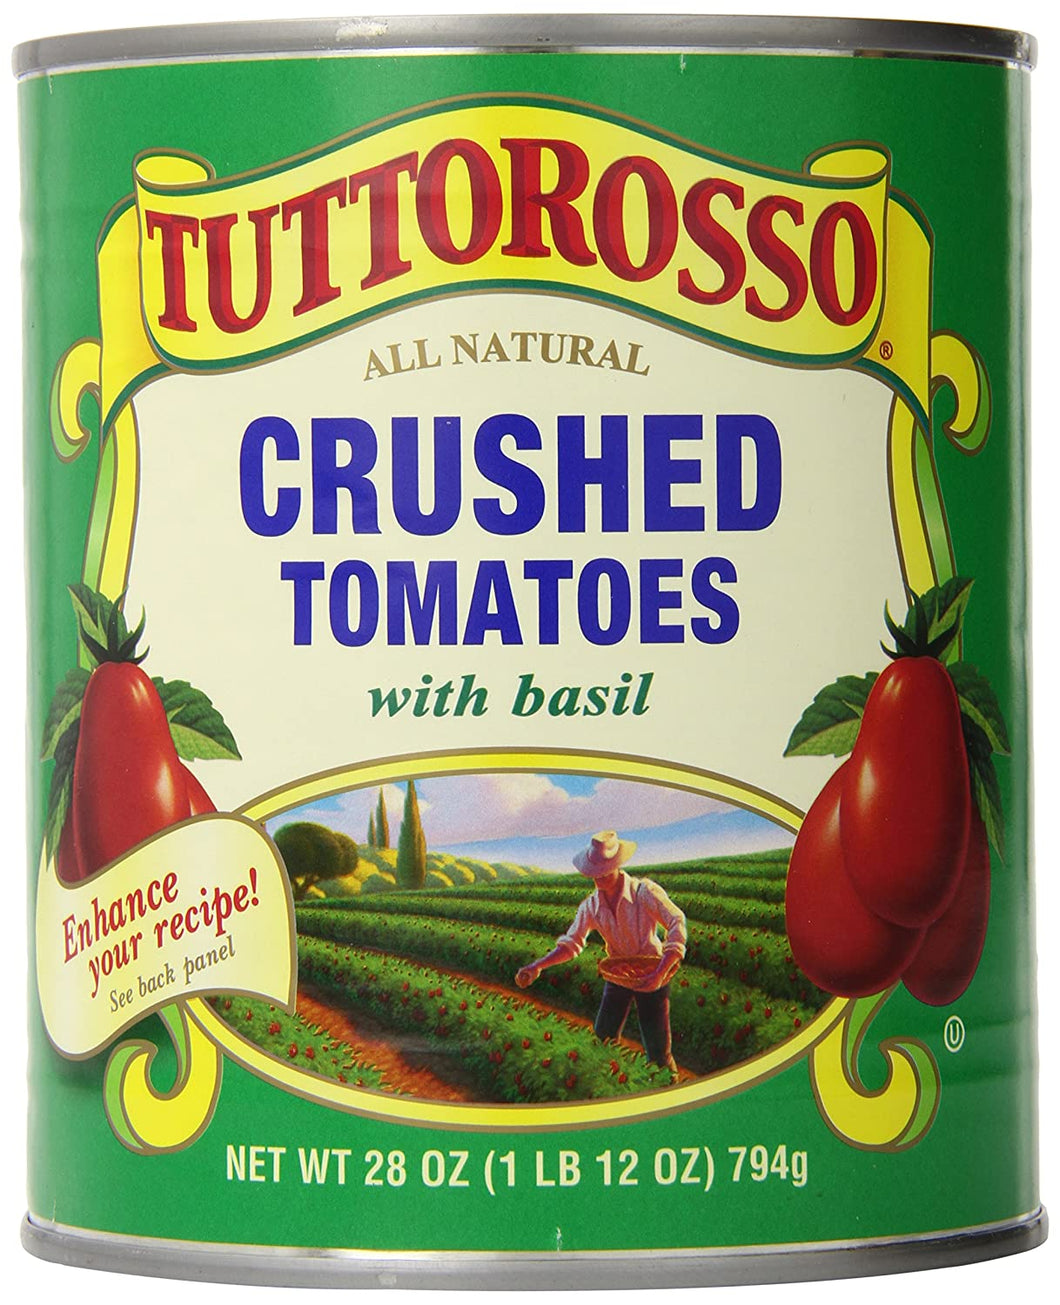 Tuttorosso Crushed Tomato with Basil 28oz